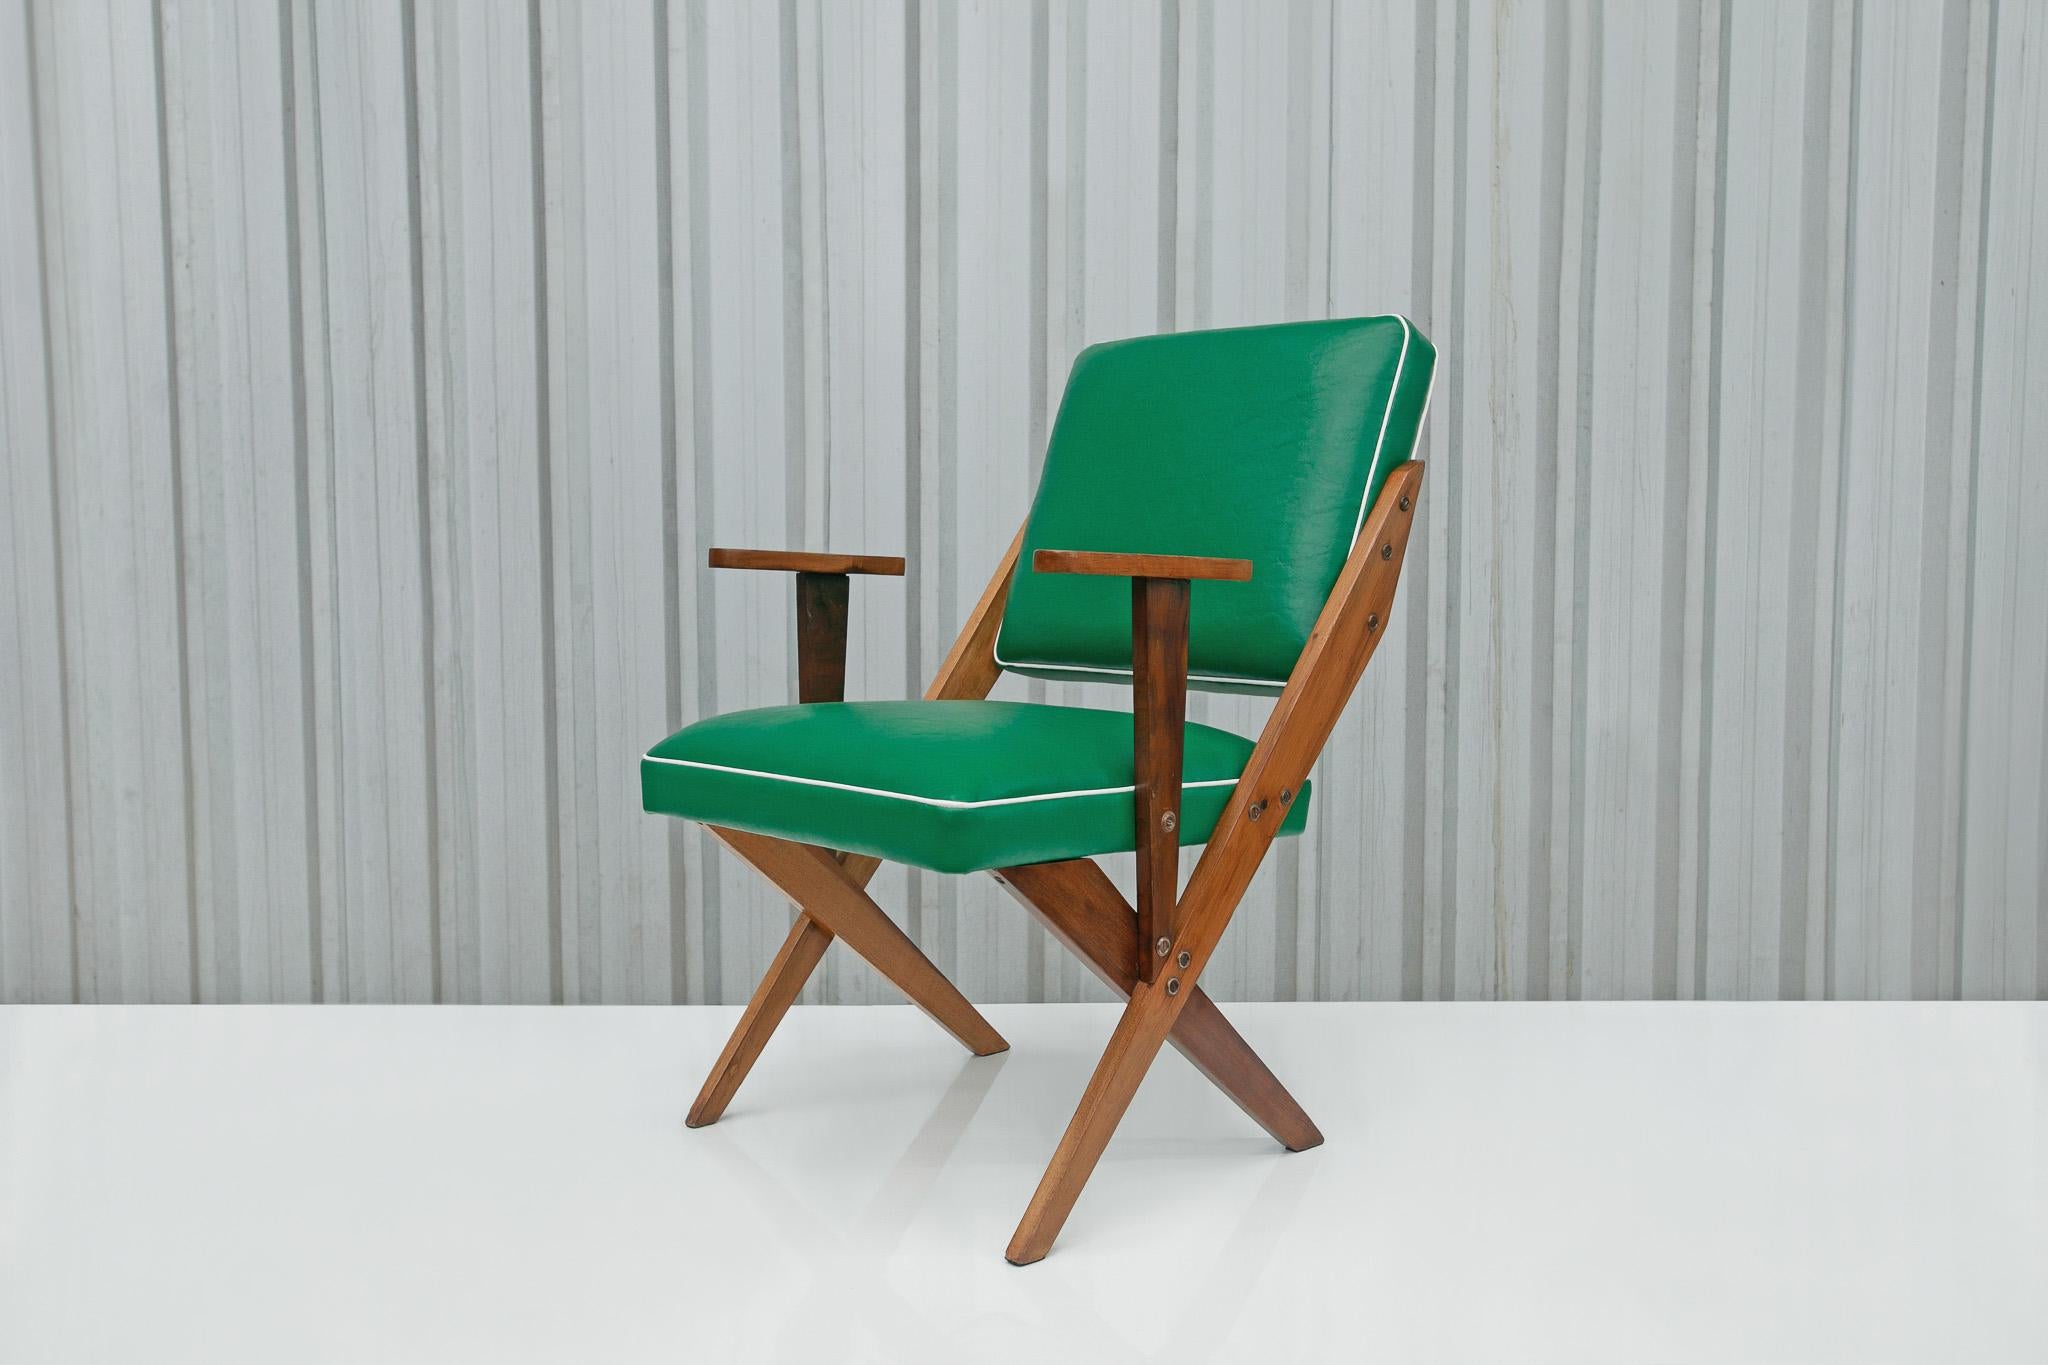 Available today, this gorgeous and super comfortable Mid-century Armchair in Wood & Green Faux Leather designed by Jose Zanine Caldas in the fifties is gorgeous!

This one-of-a-kind armchair consists of a hardwood structure with re-upholstered